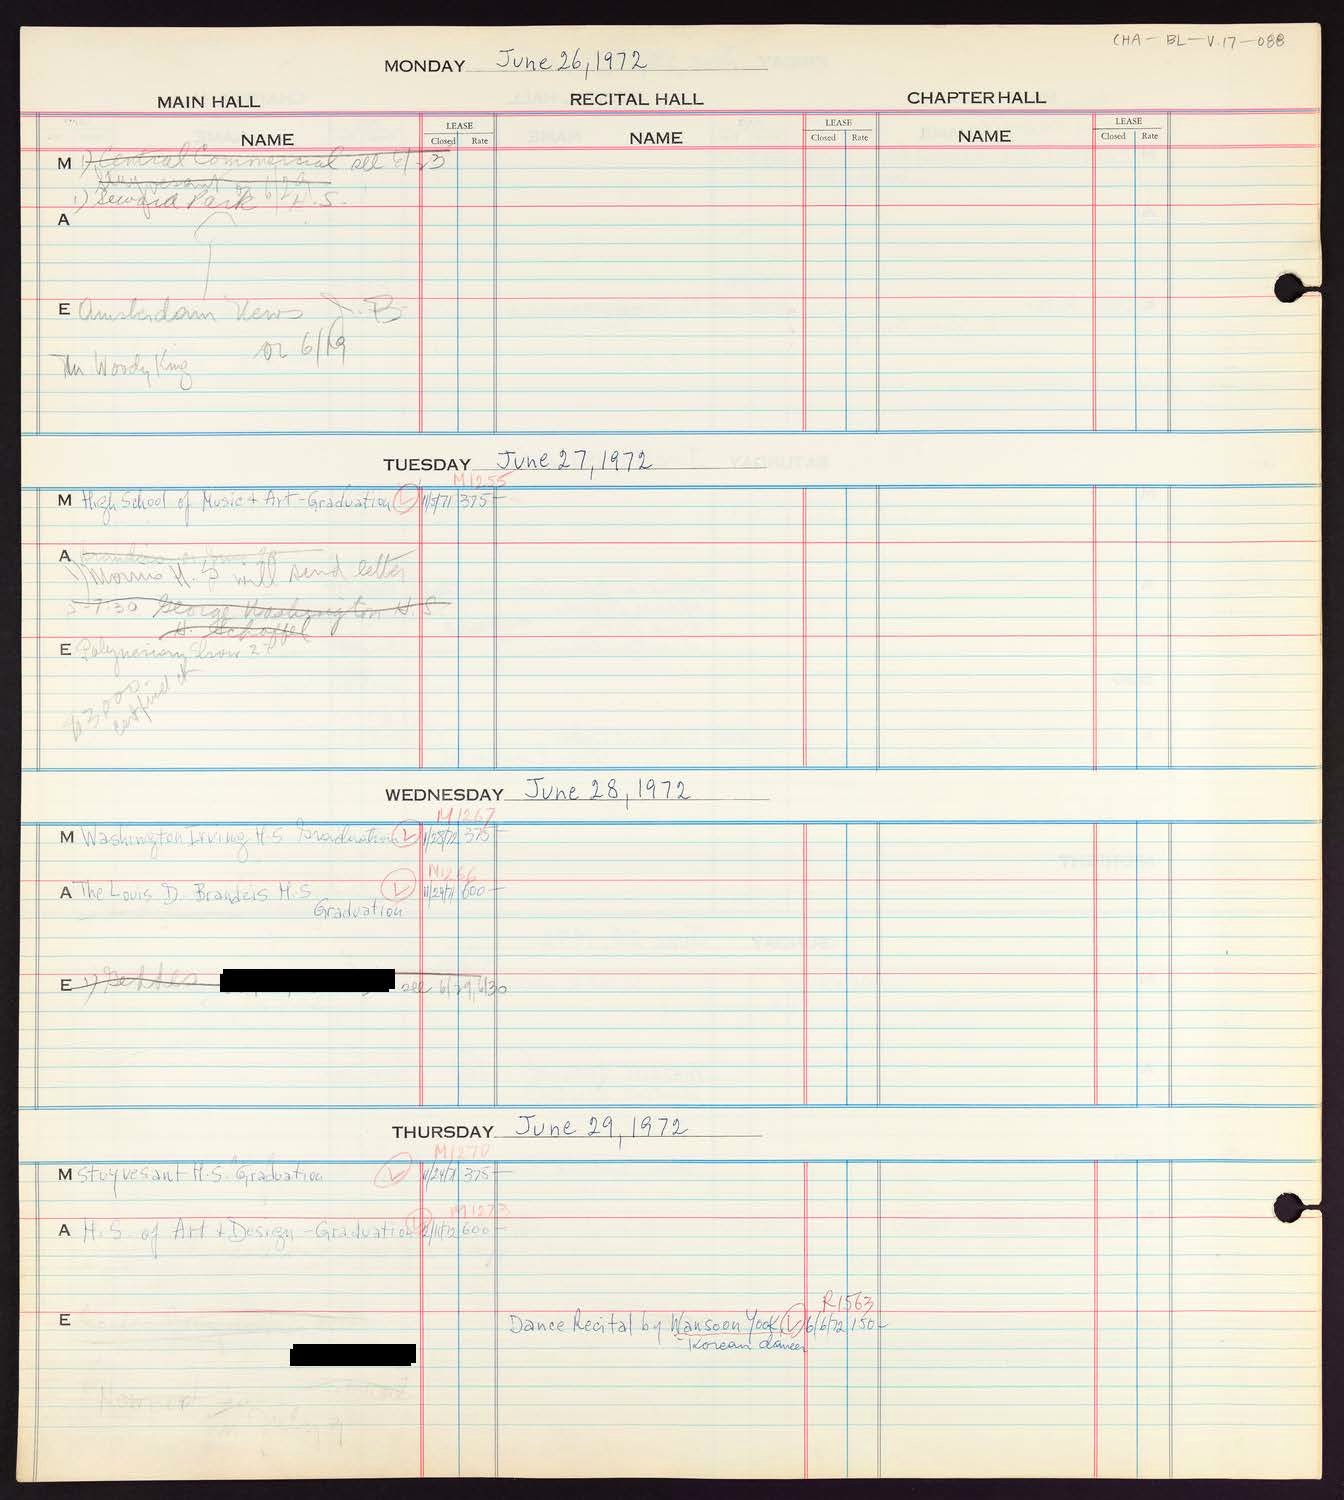 Carnegie Hall Booking Ledger, volume 17, page 88